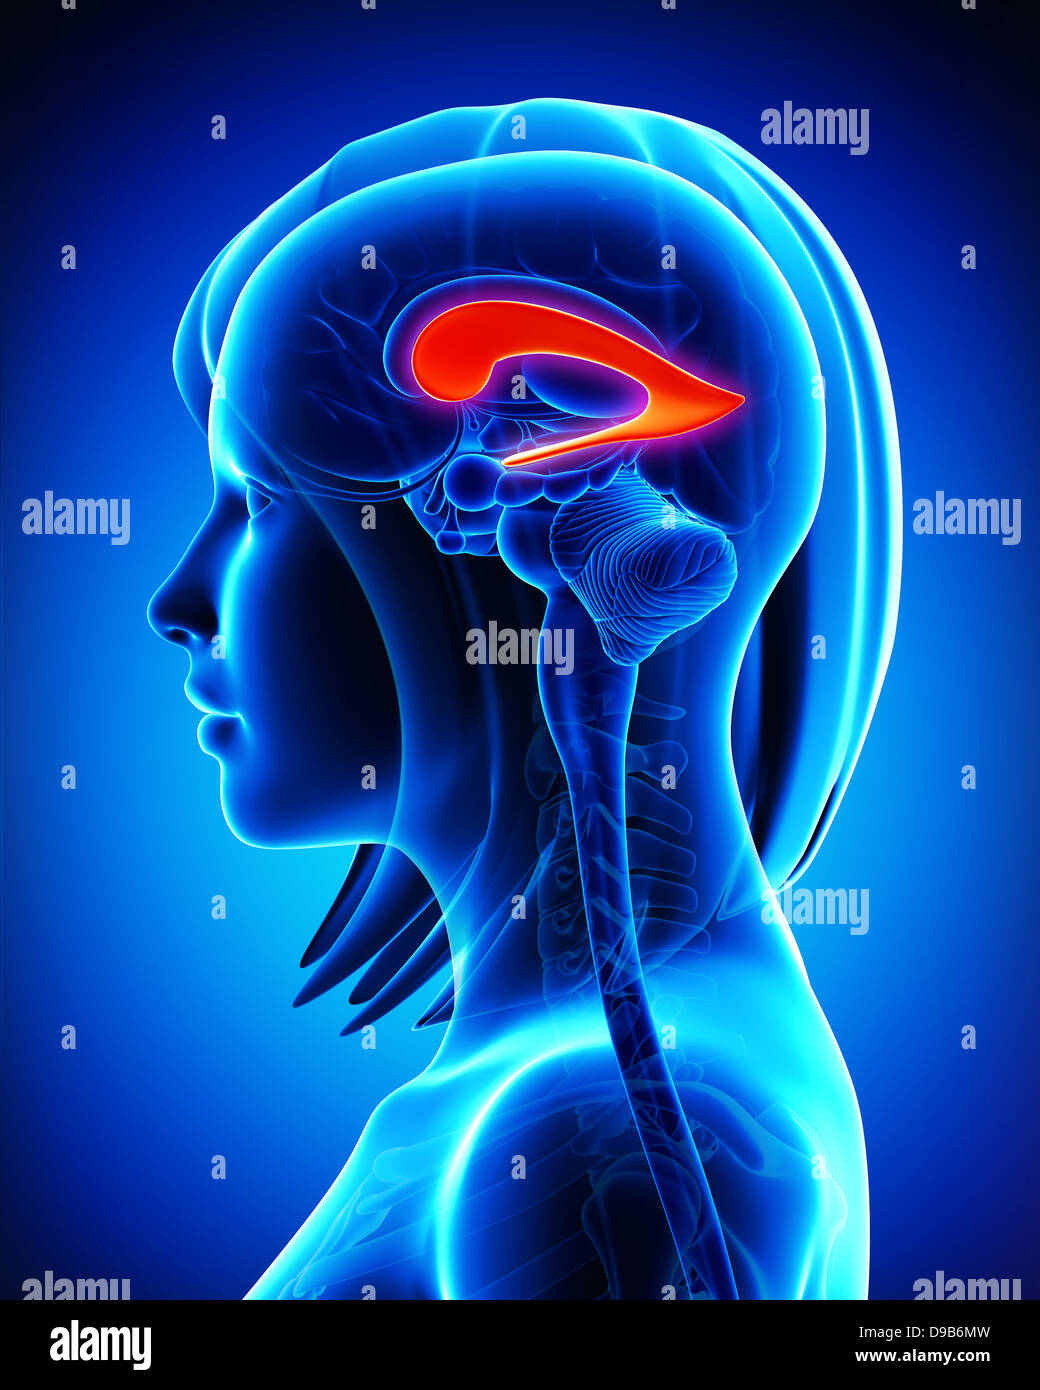 Anatomy of brain of lateral ventricle in blue Stock Photo